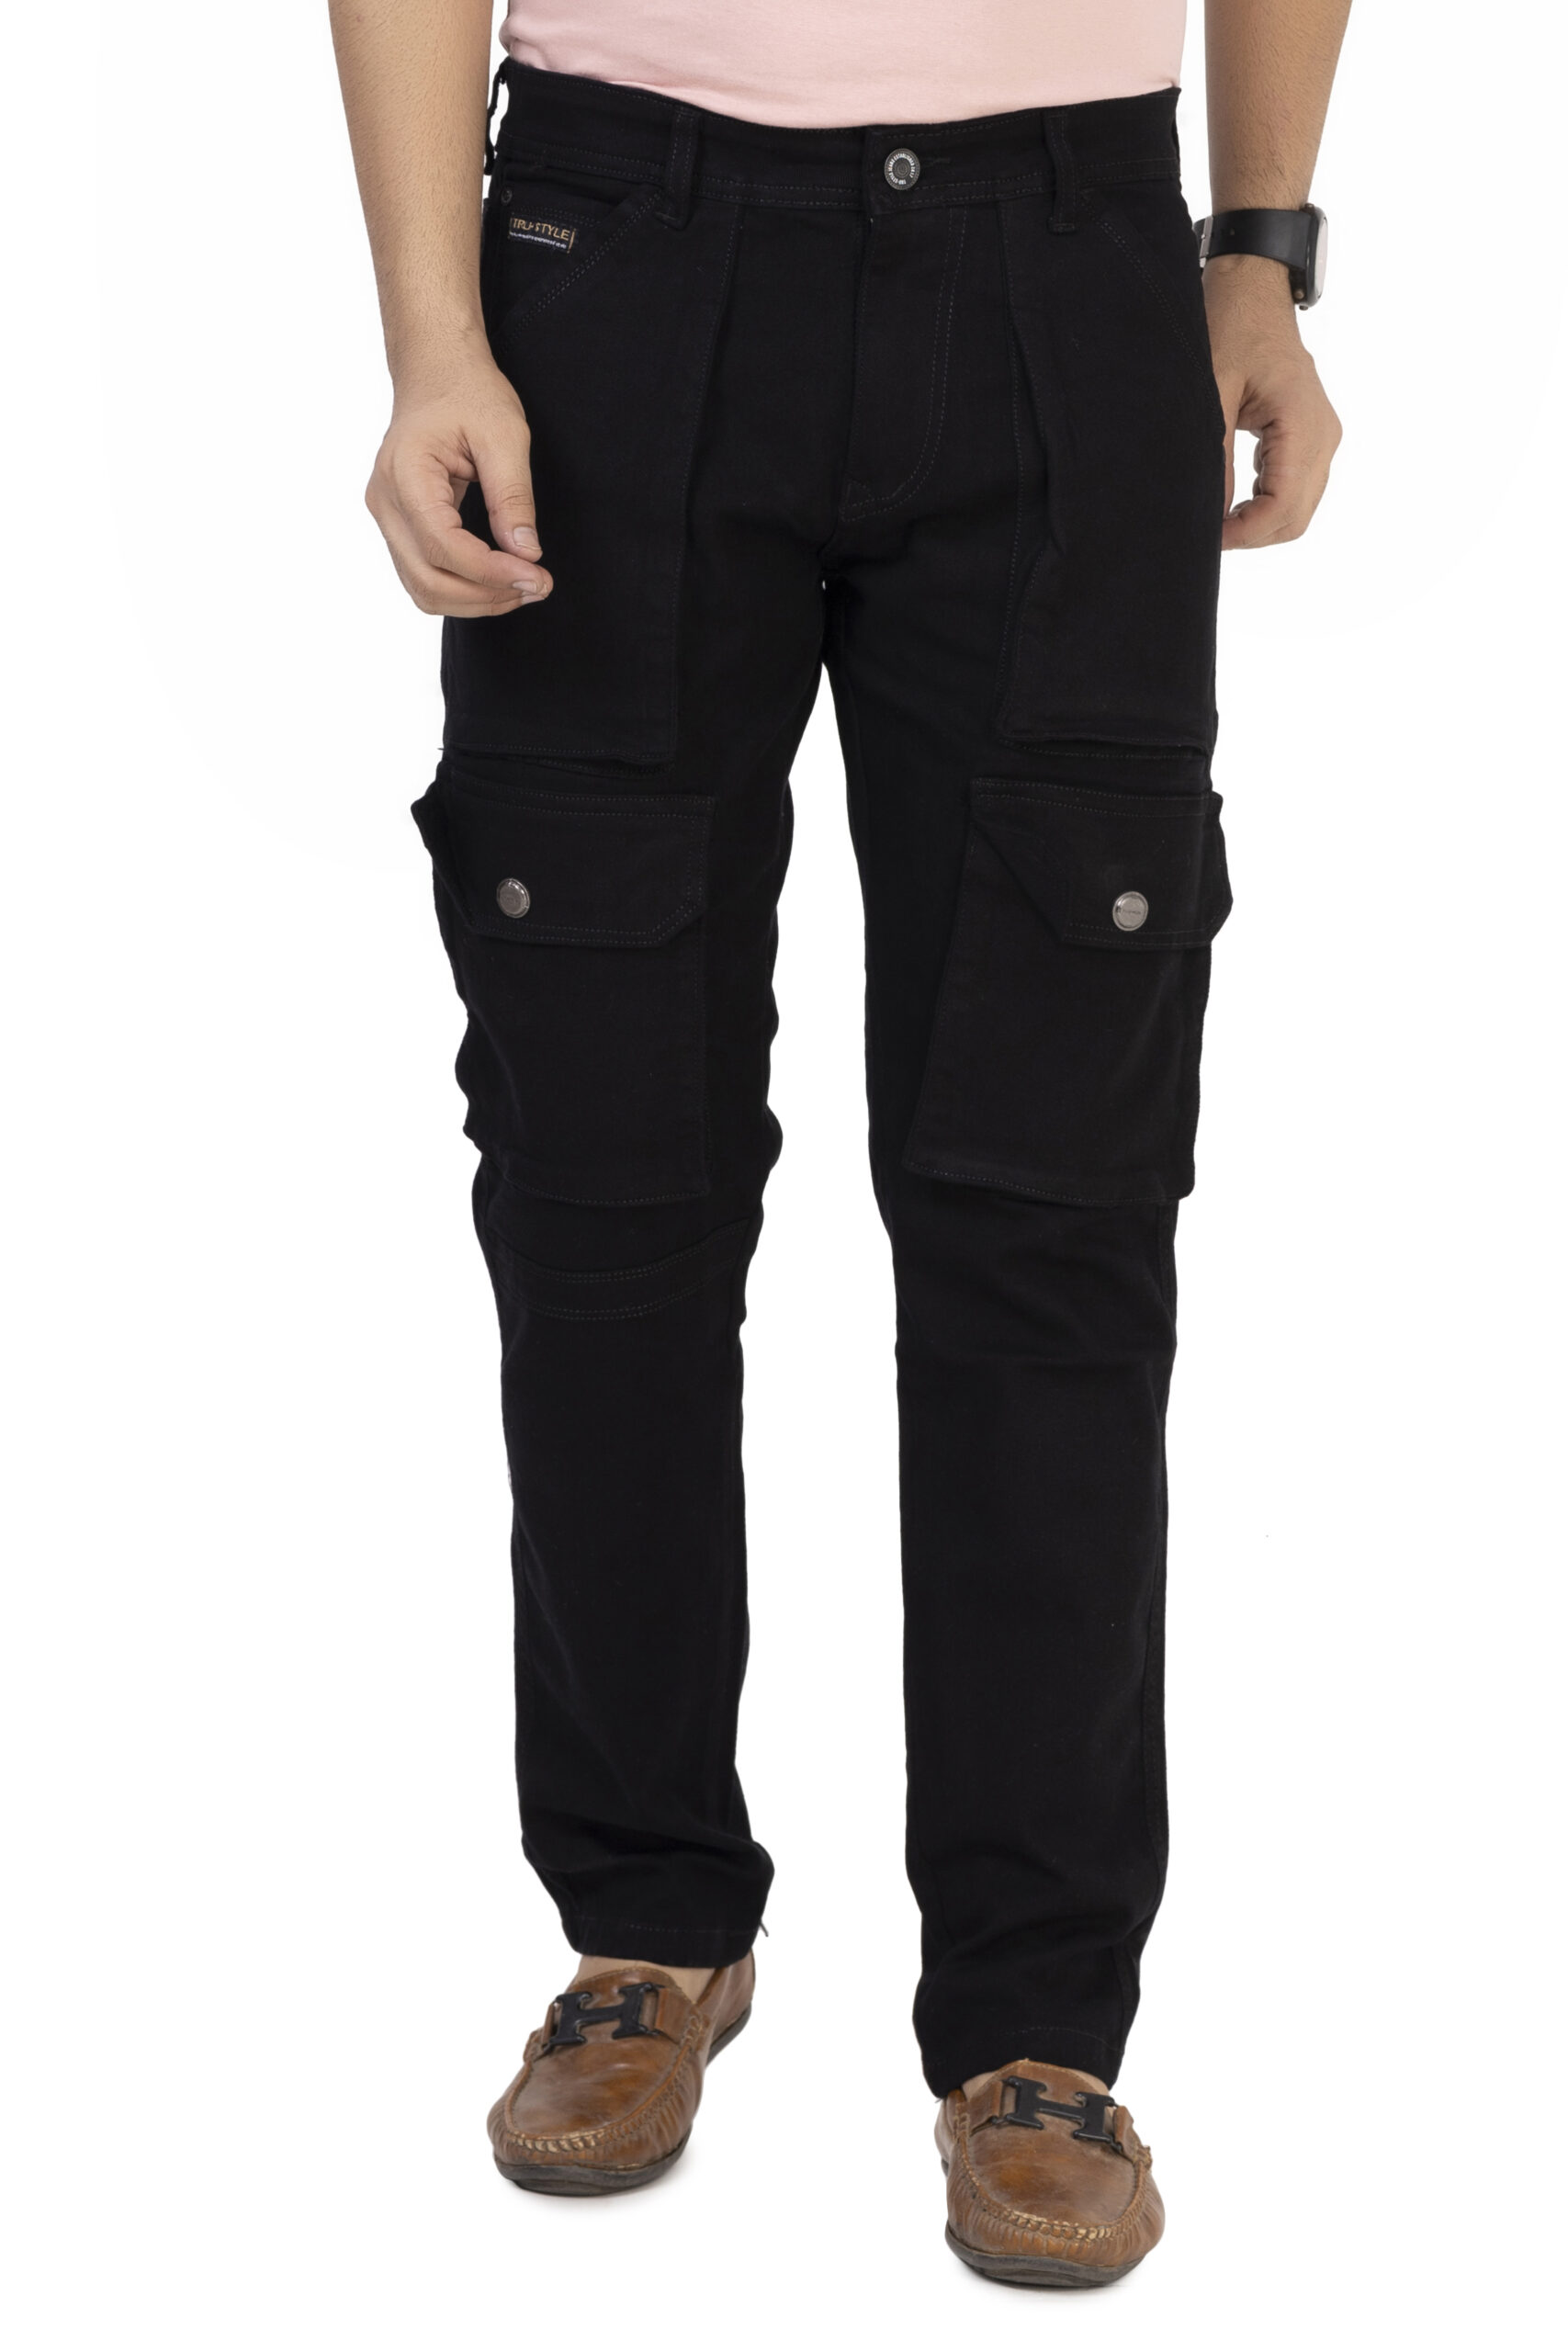 Buy URBAN INDY Genuine Cotton Twill Men's 6 Pocket Carpenter Cargo Pants -  Utilitarian Contrast Stitch Trousers Loose Fit (Small, Black) at Amazon.in